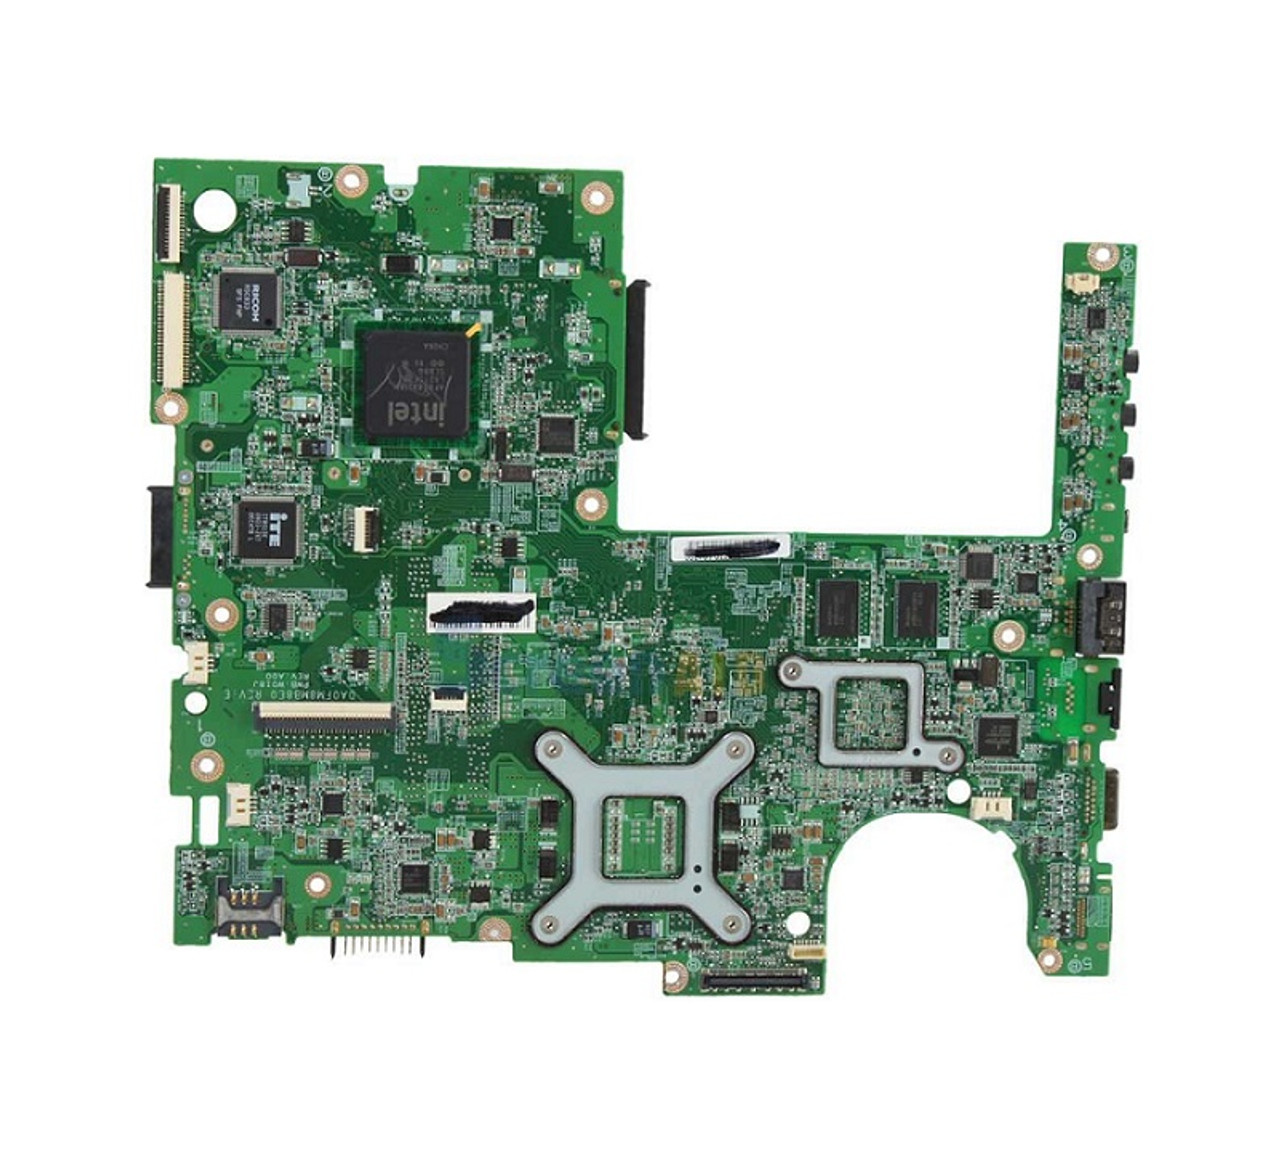 A000041070 - Toshiba System Board for Satellite P300 Intel Laptop (Refurbished)